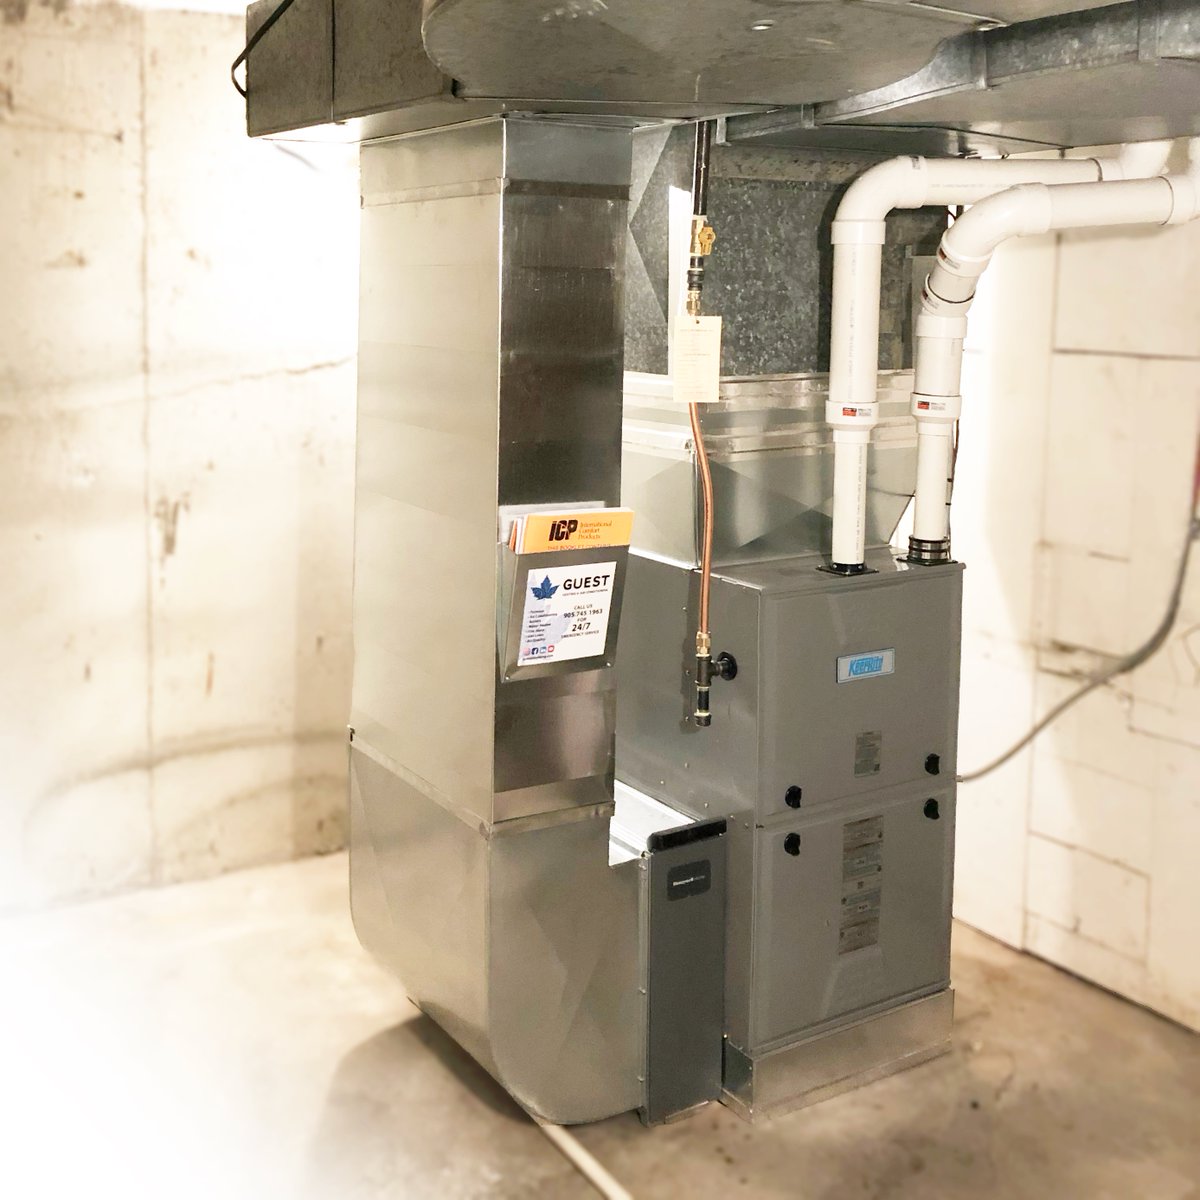 For annual servicing, it’s advisable to schedule a maintenance appointment in the spring or early fall. During spring, if repairs are necessary, it’s best to have them done in the warmer months when you don’t rely on heating your home. 🏠#furnace #furnacemaintenance #hvac